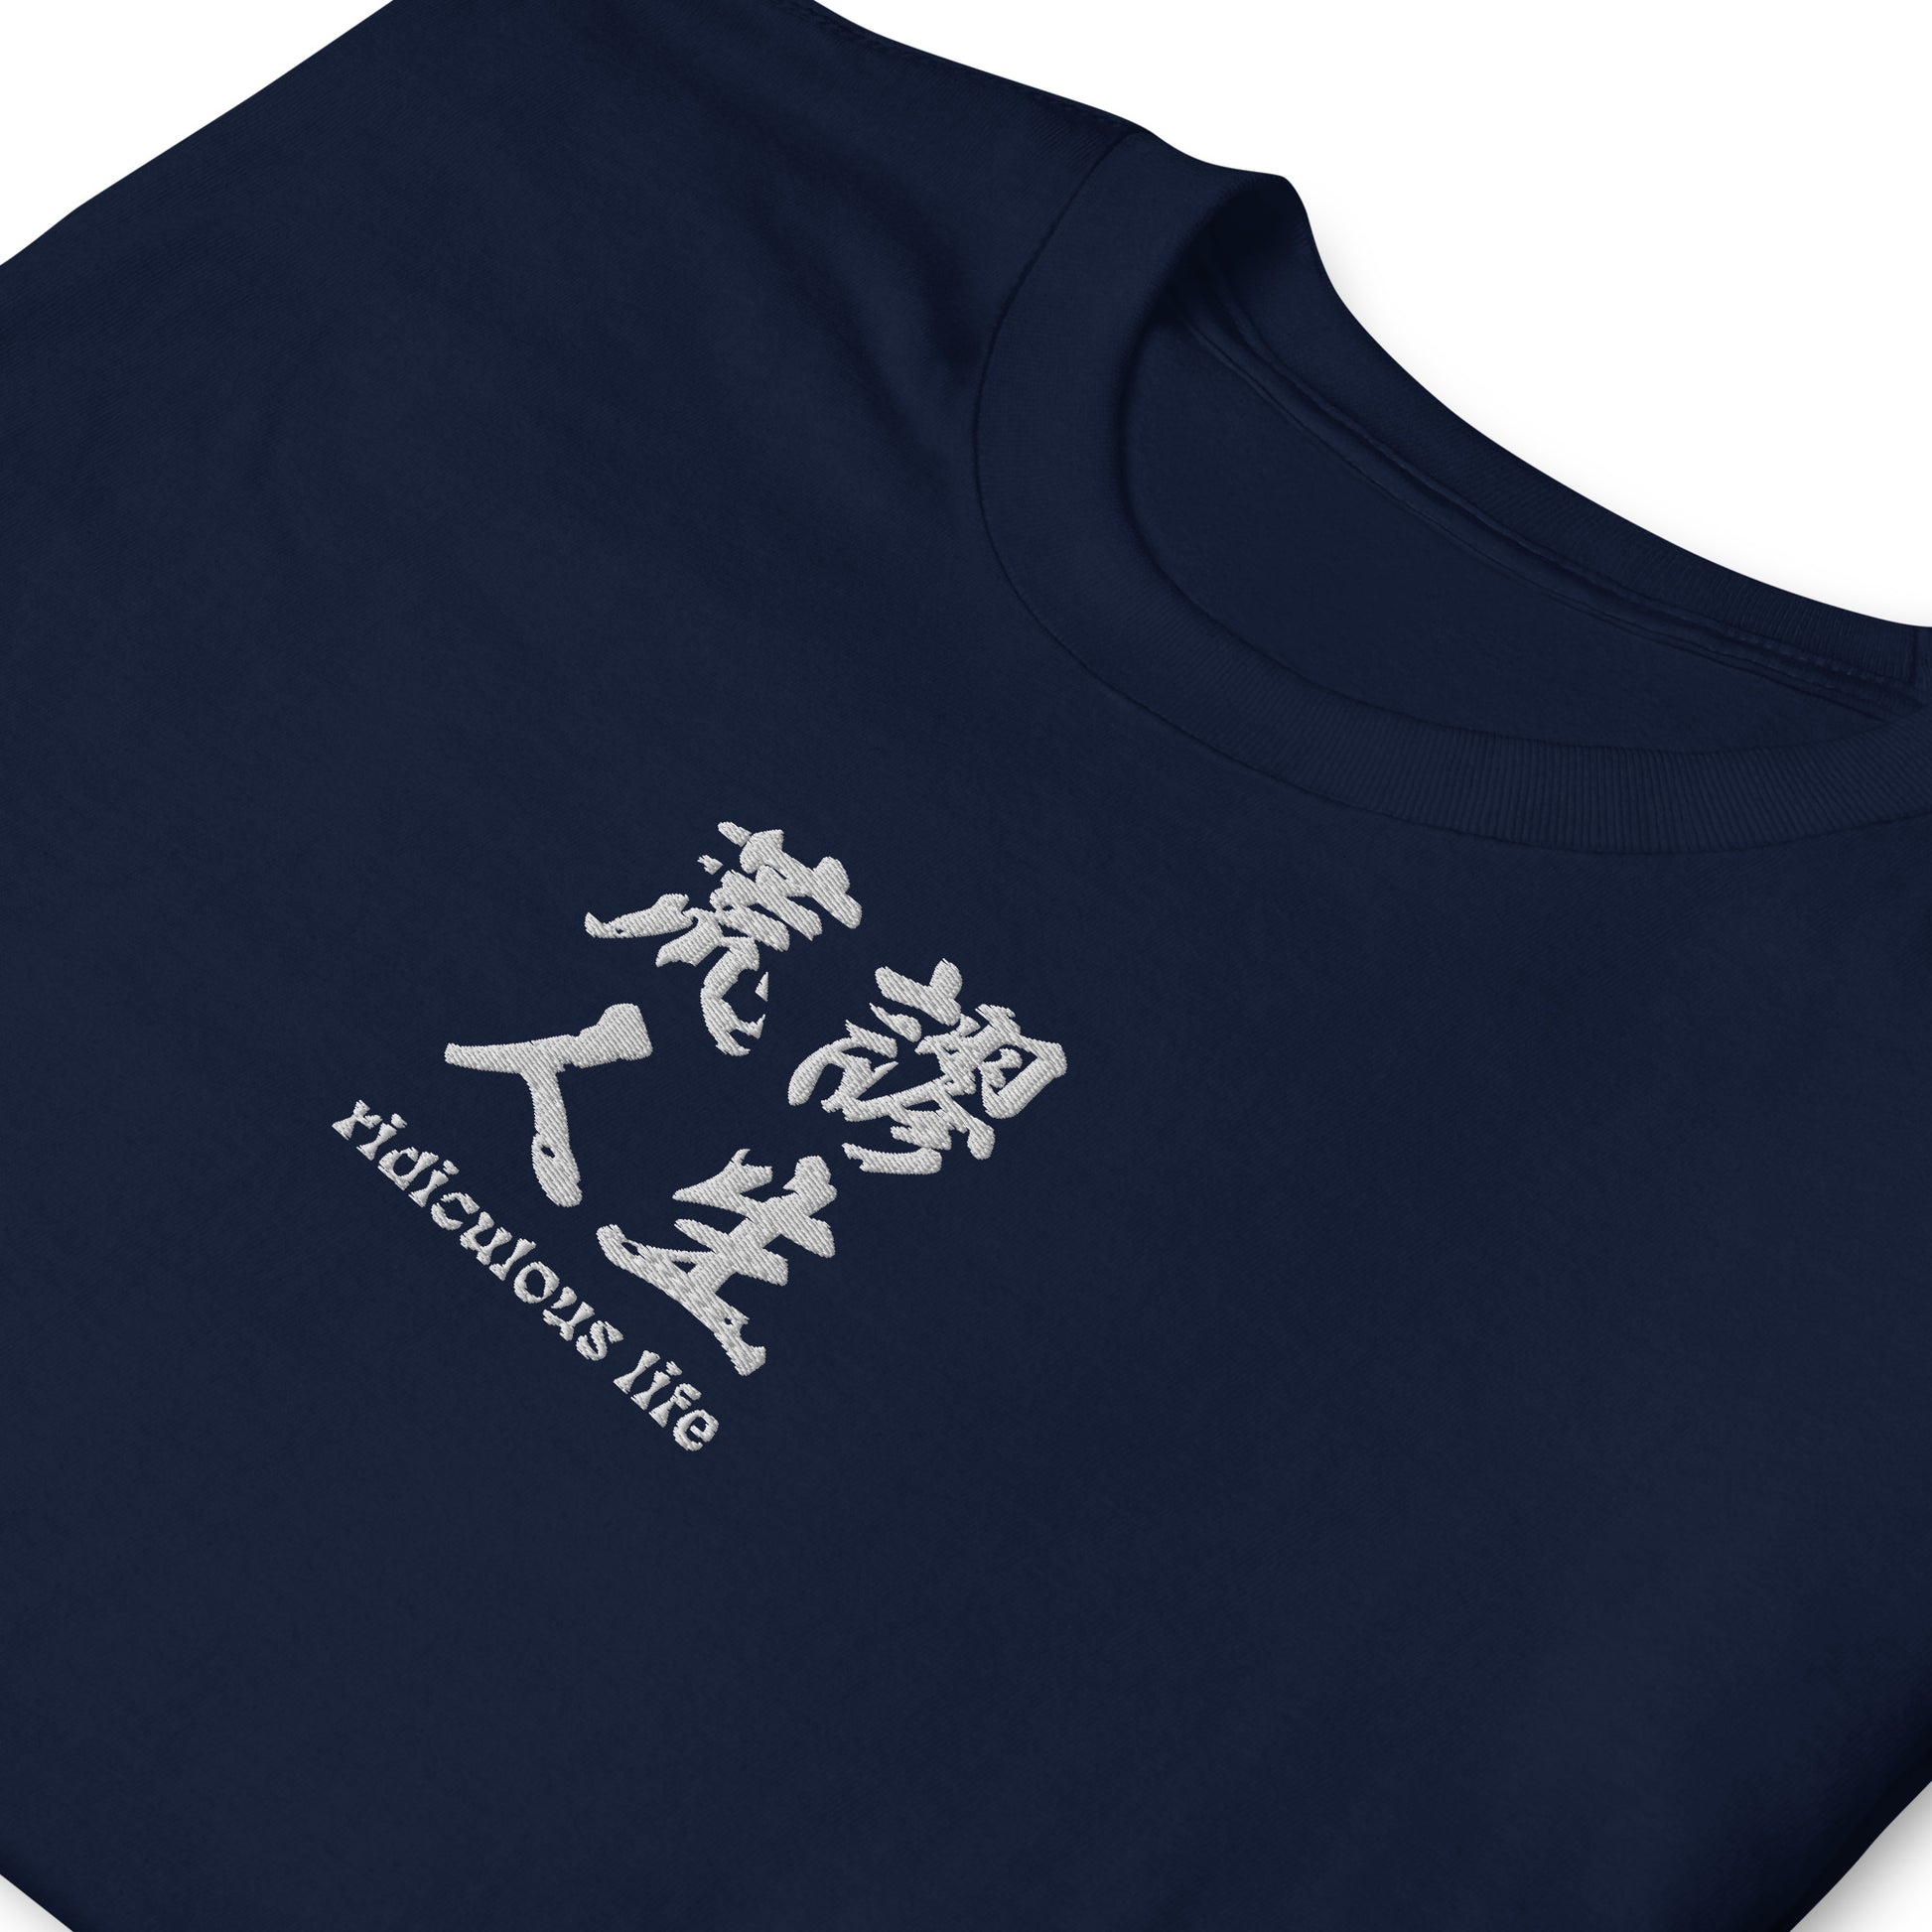 Navy High Quality Tee - Front Design with an Black Embroidery "Ridiculous Life" in Chinese and English